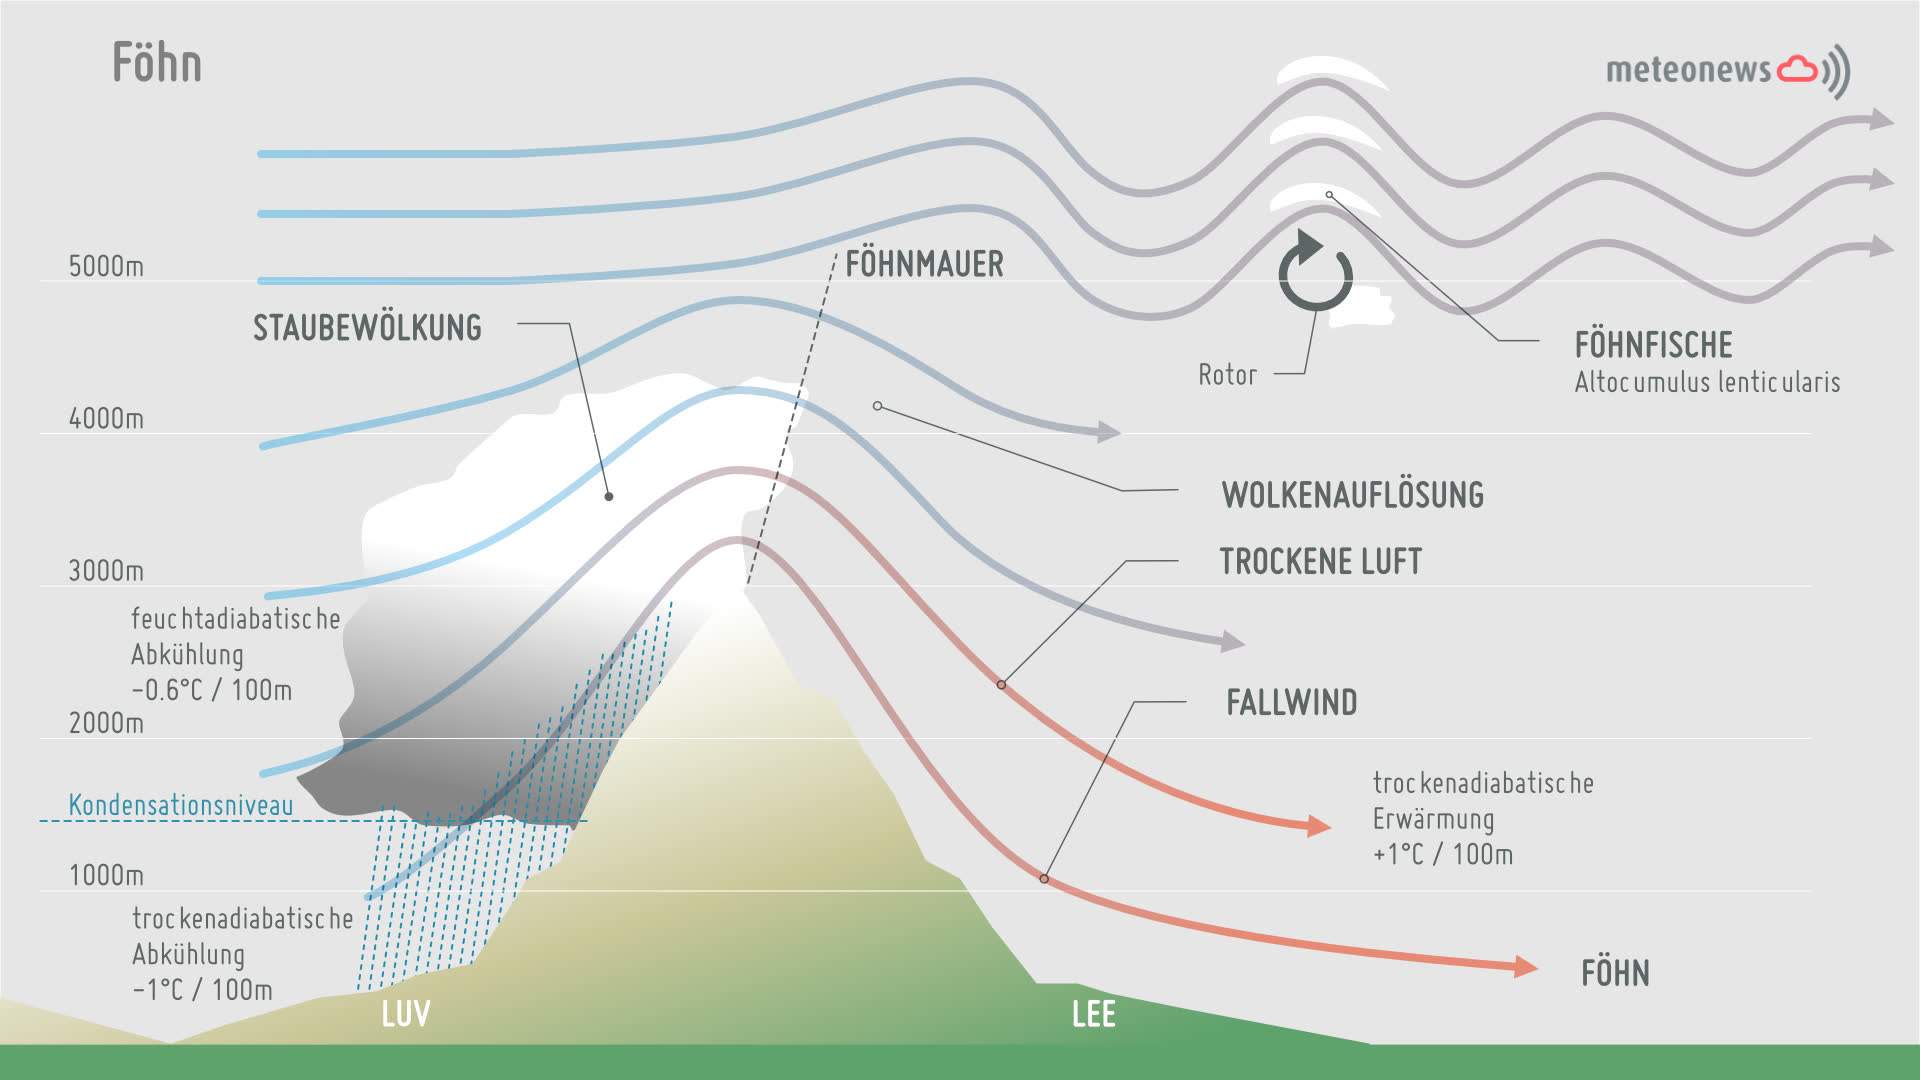 Fig. 1: Schematic representation of a foehn, in this case with precipitation upwind of the mountains ; Source: MeteoNews